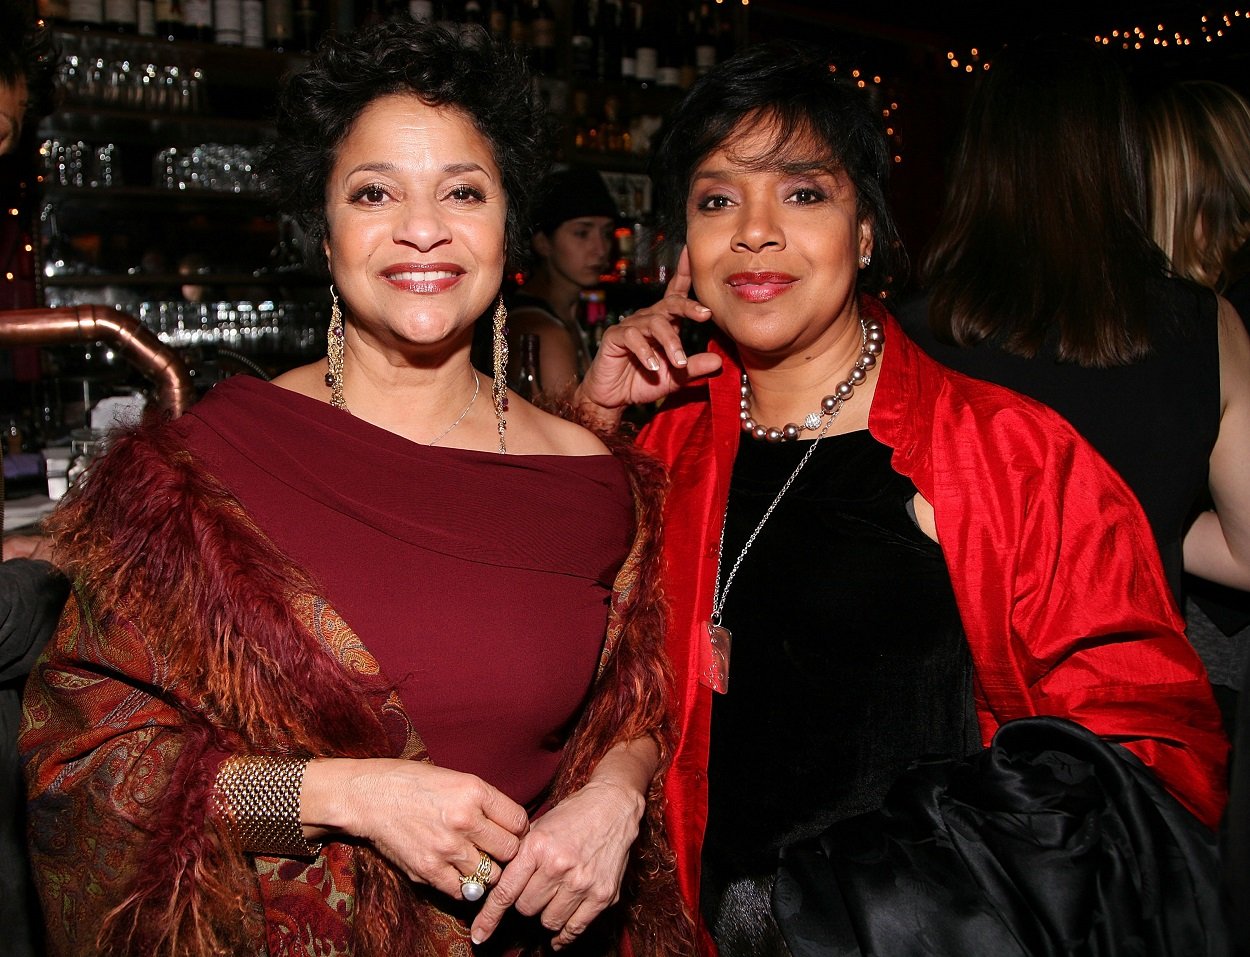 Debbie Allen vs. Phylicia Rashad Which Sister Has the Higher Net Worth?